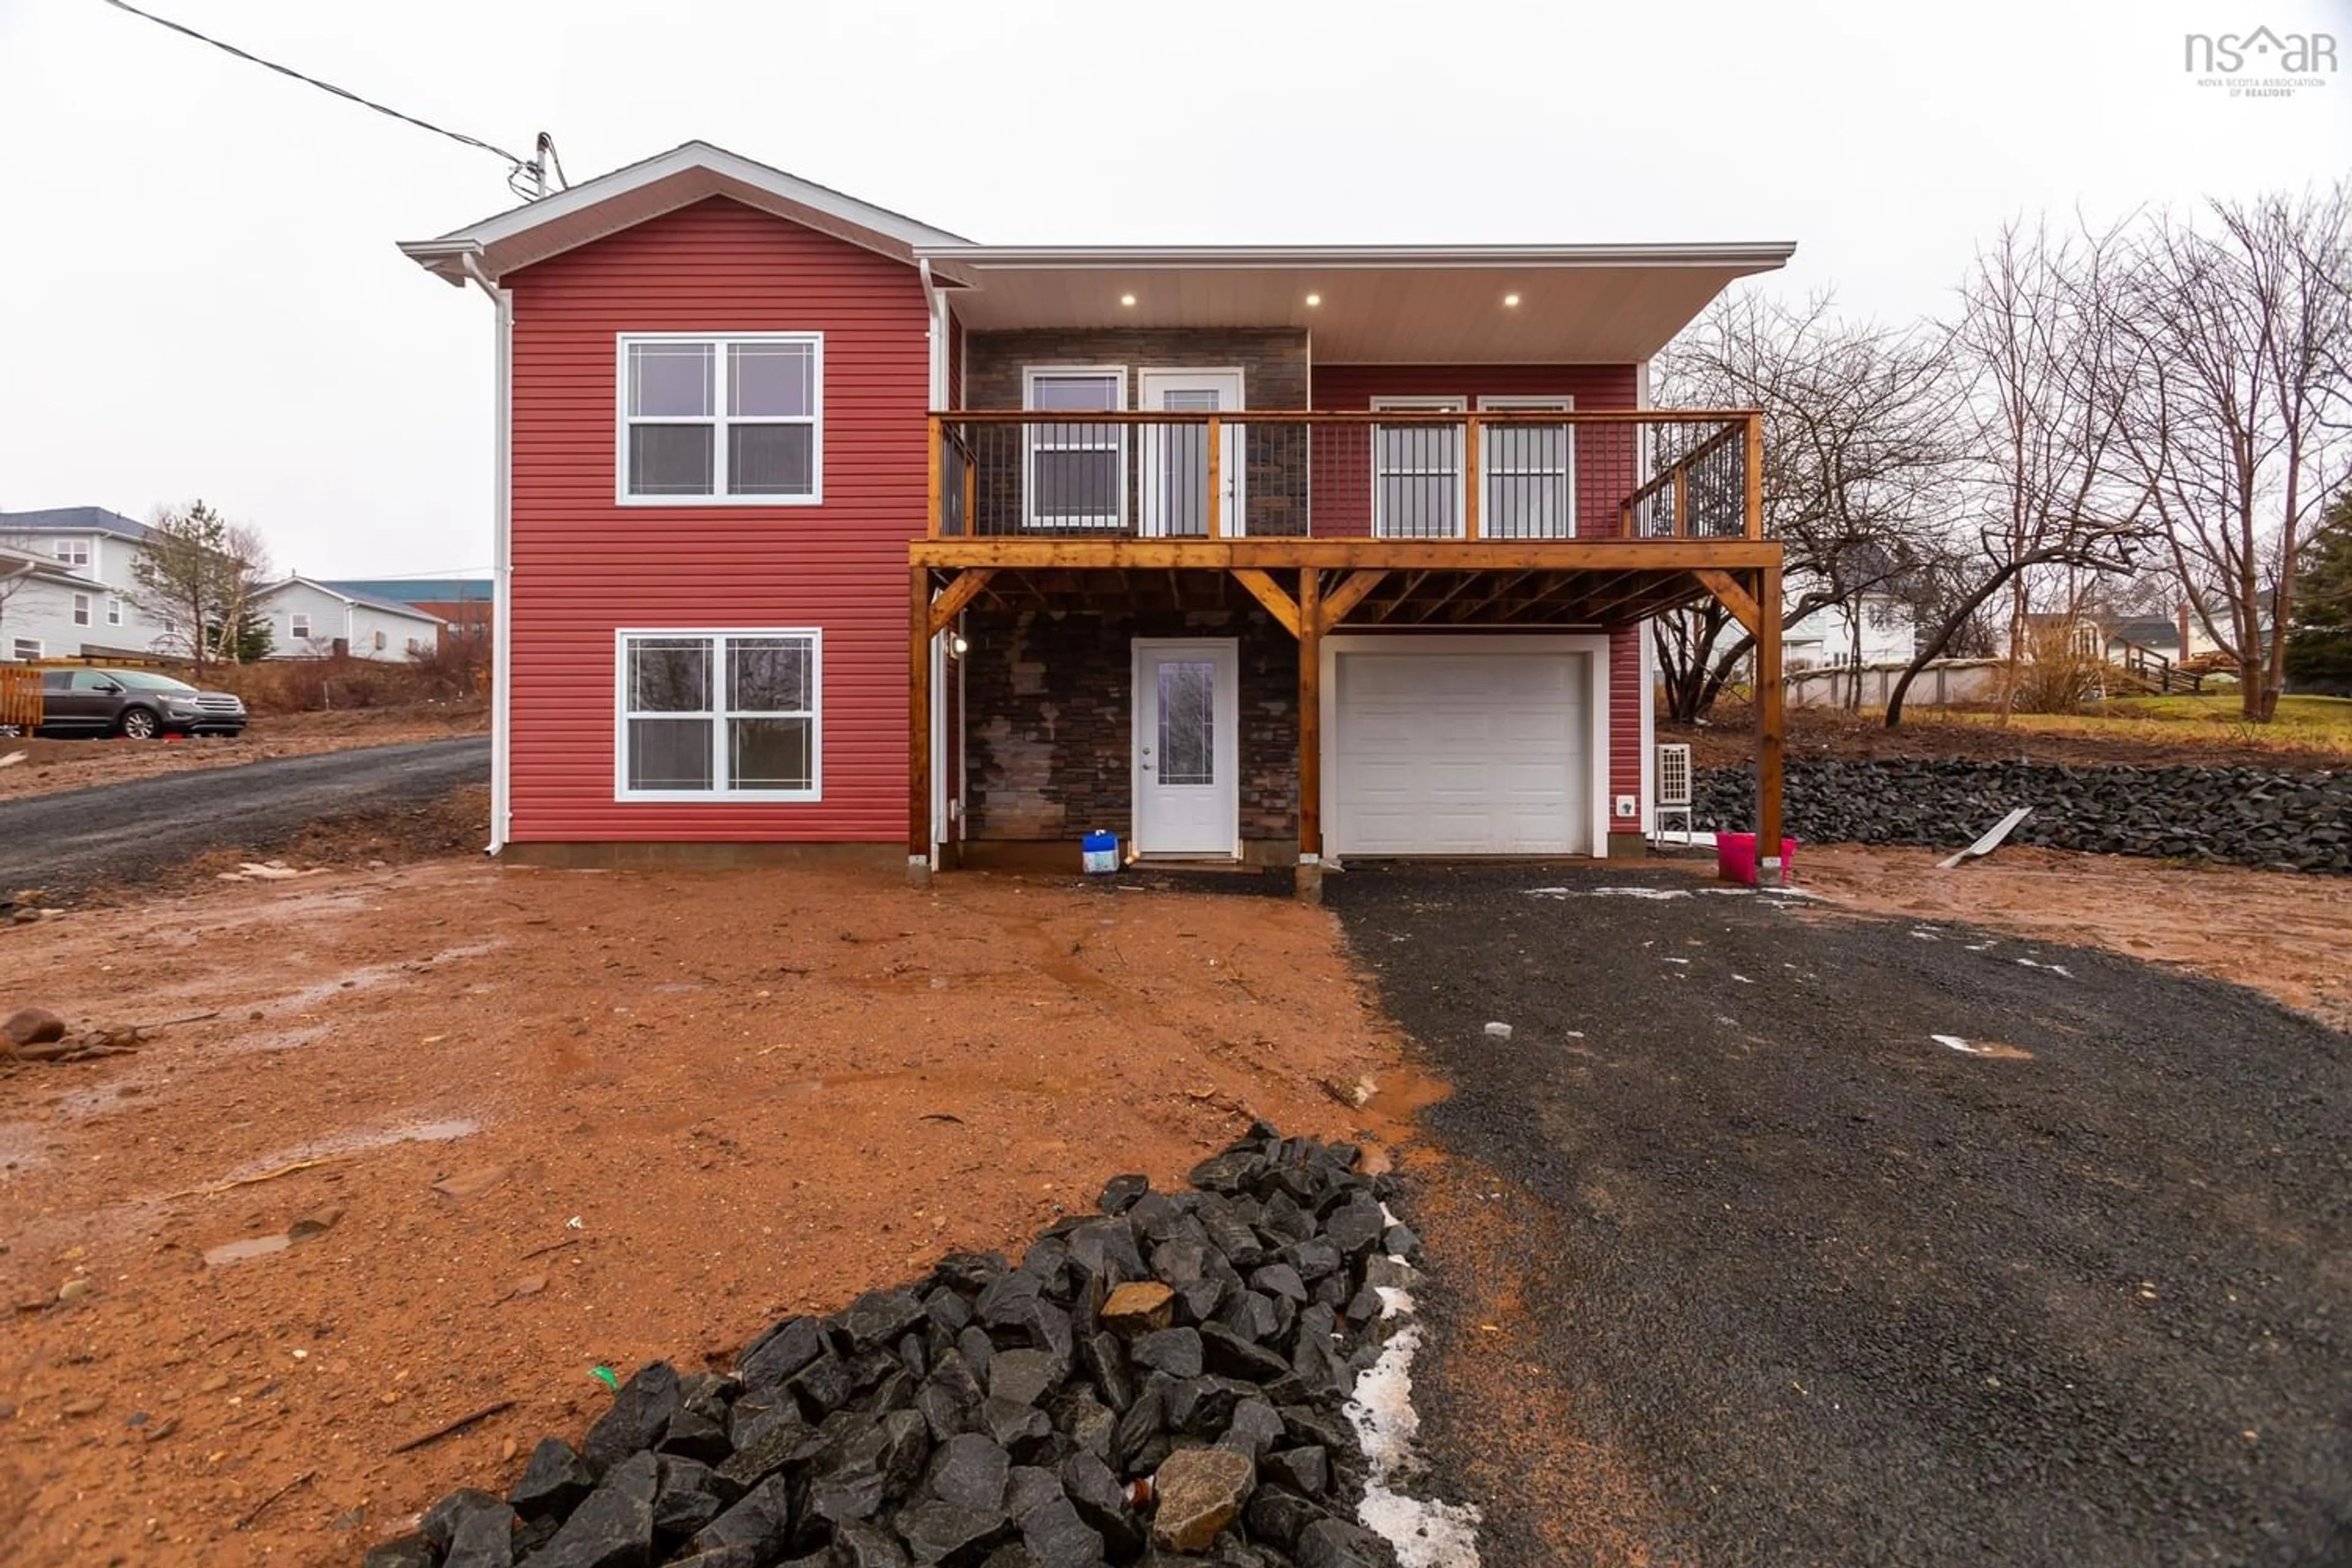 Home with unknown exterior material for Lot 18 109 Second Avenue, Digby Nova Scotia B0V 1A0